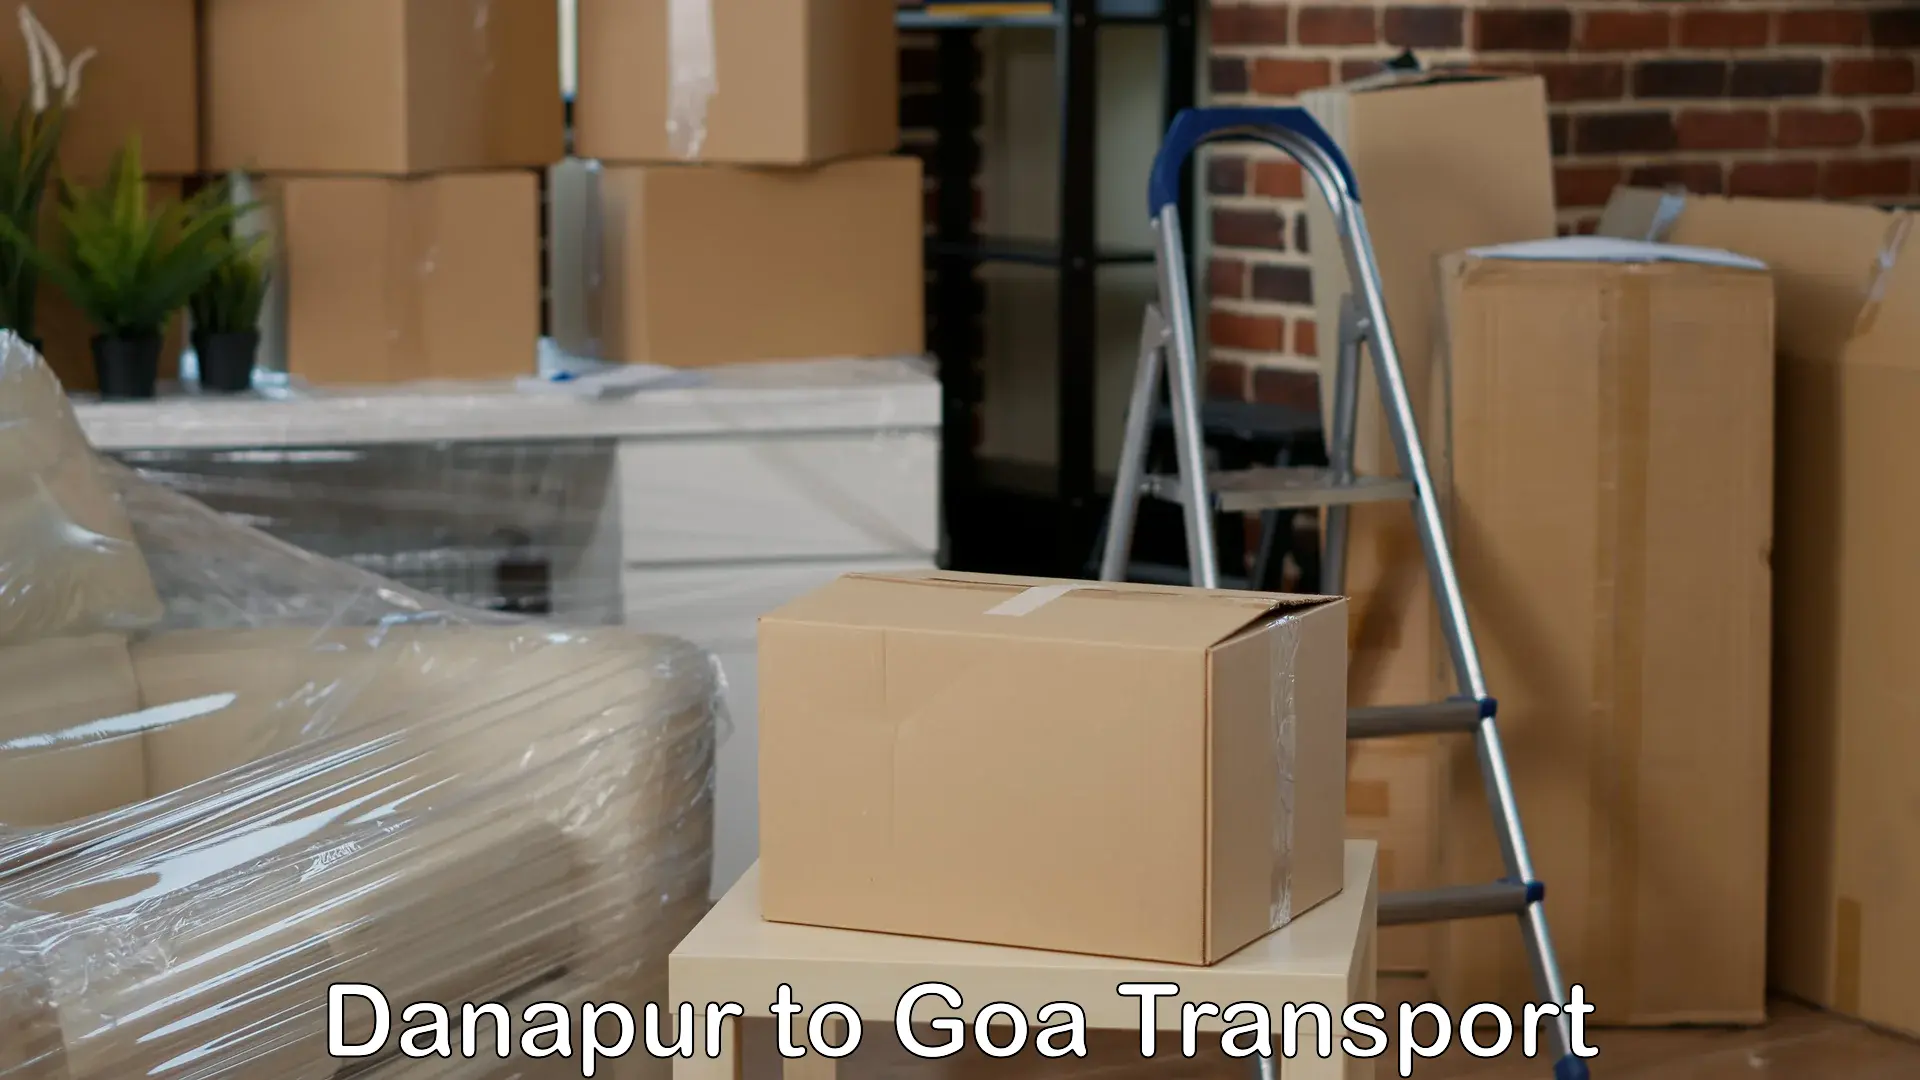 Truck transport companies in India Danapur to South Goa